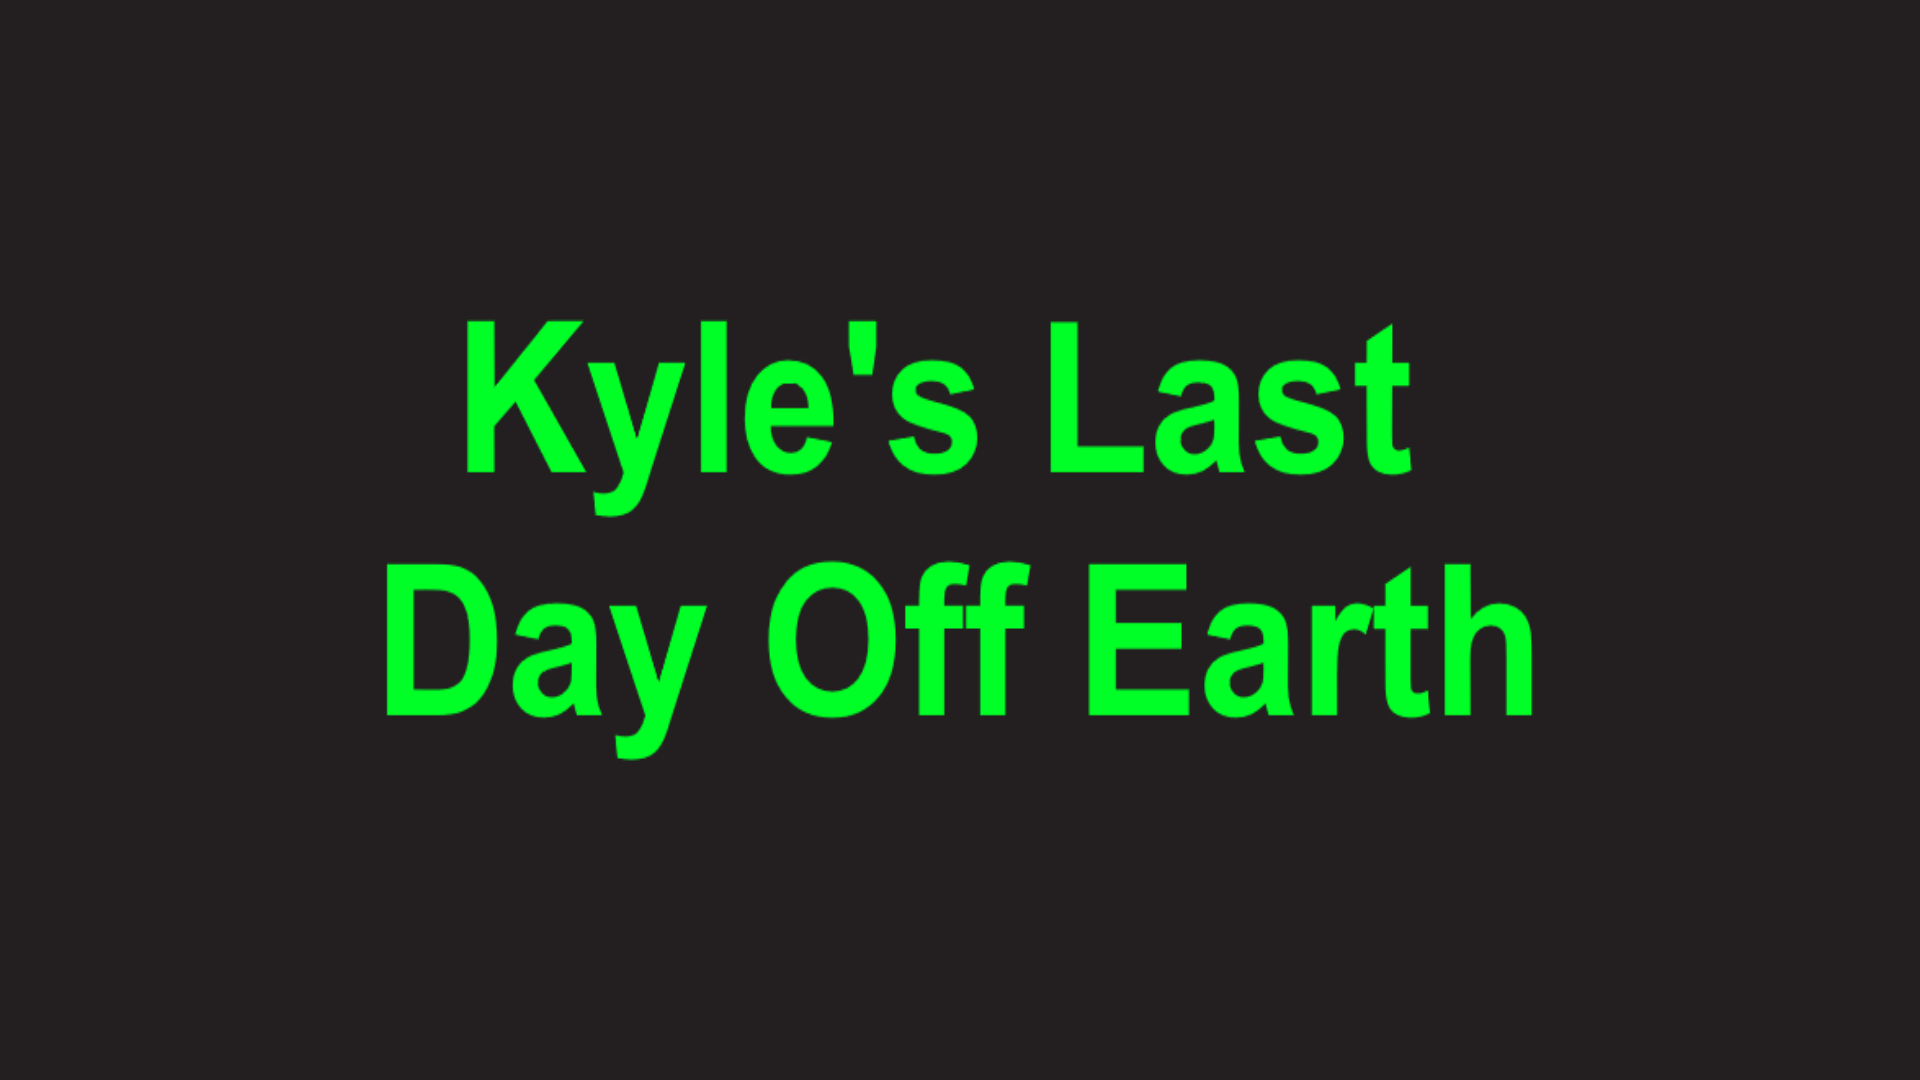 Kyle's Last Day Off Earth